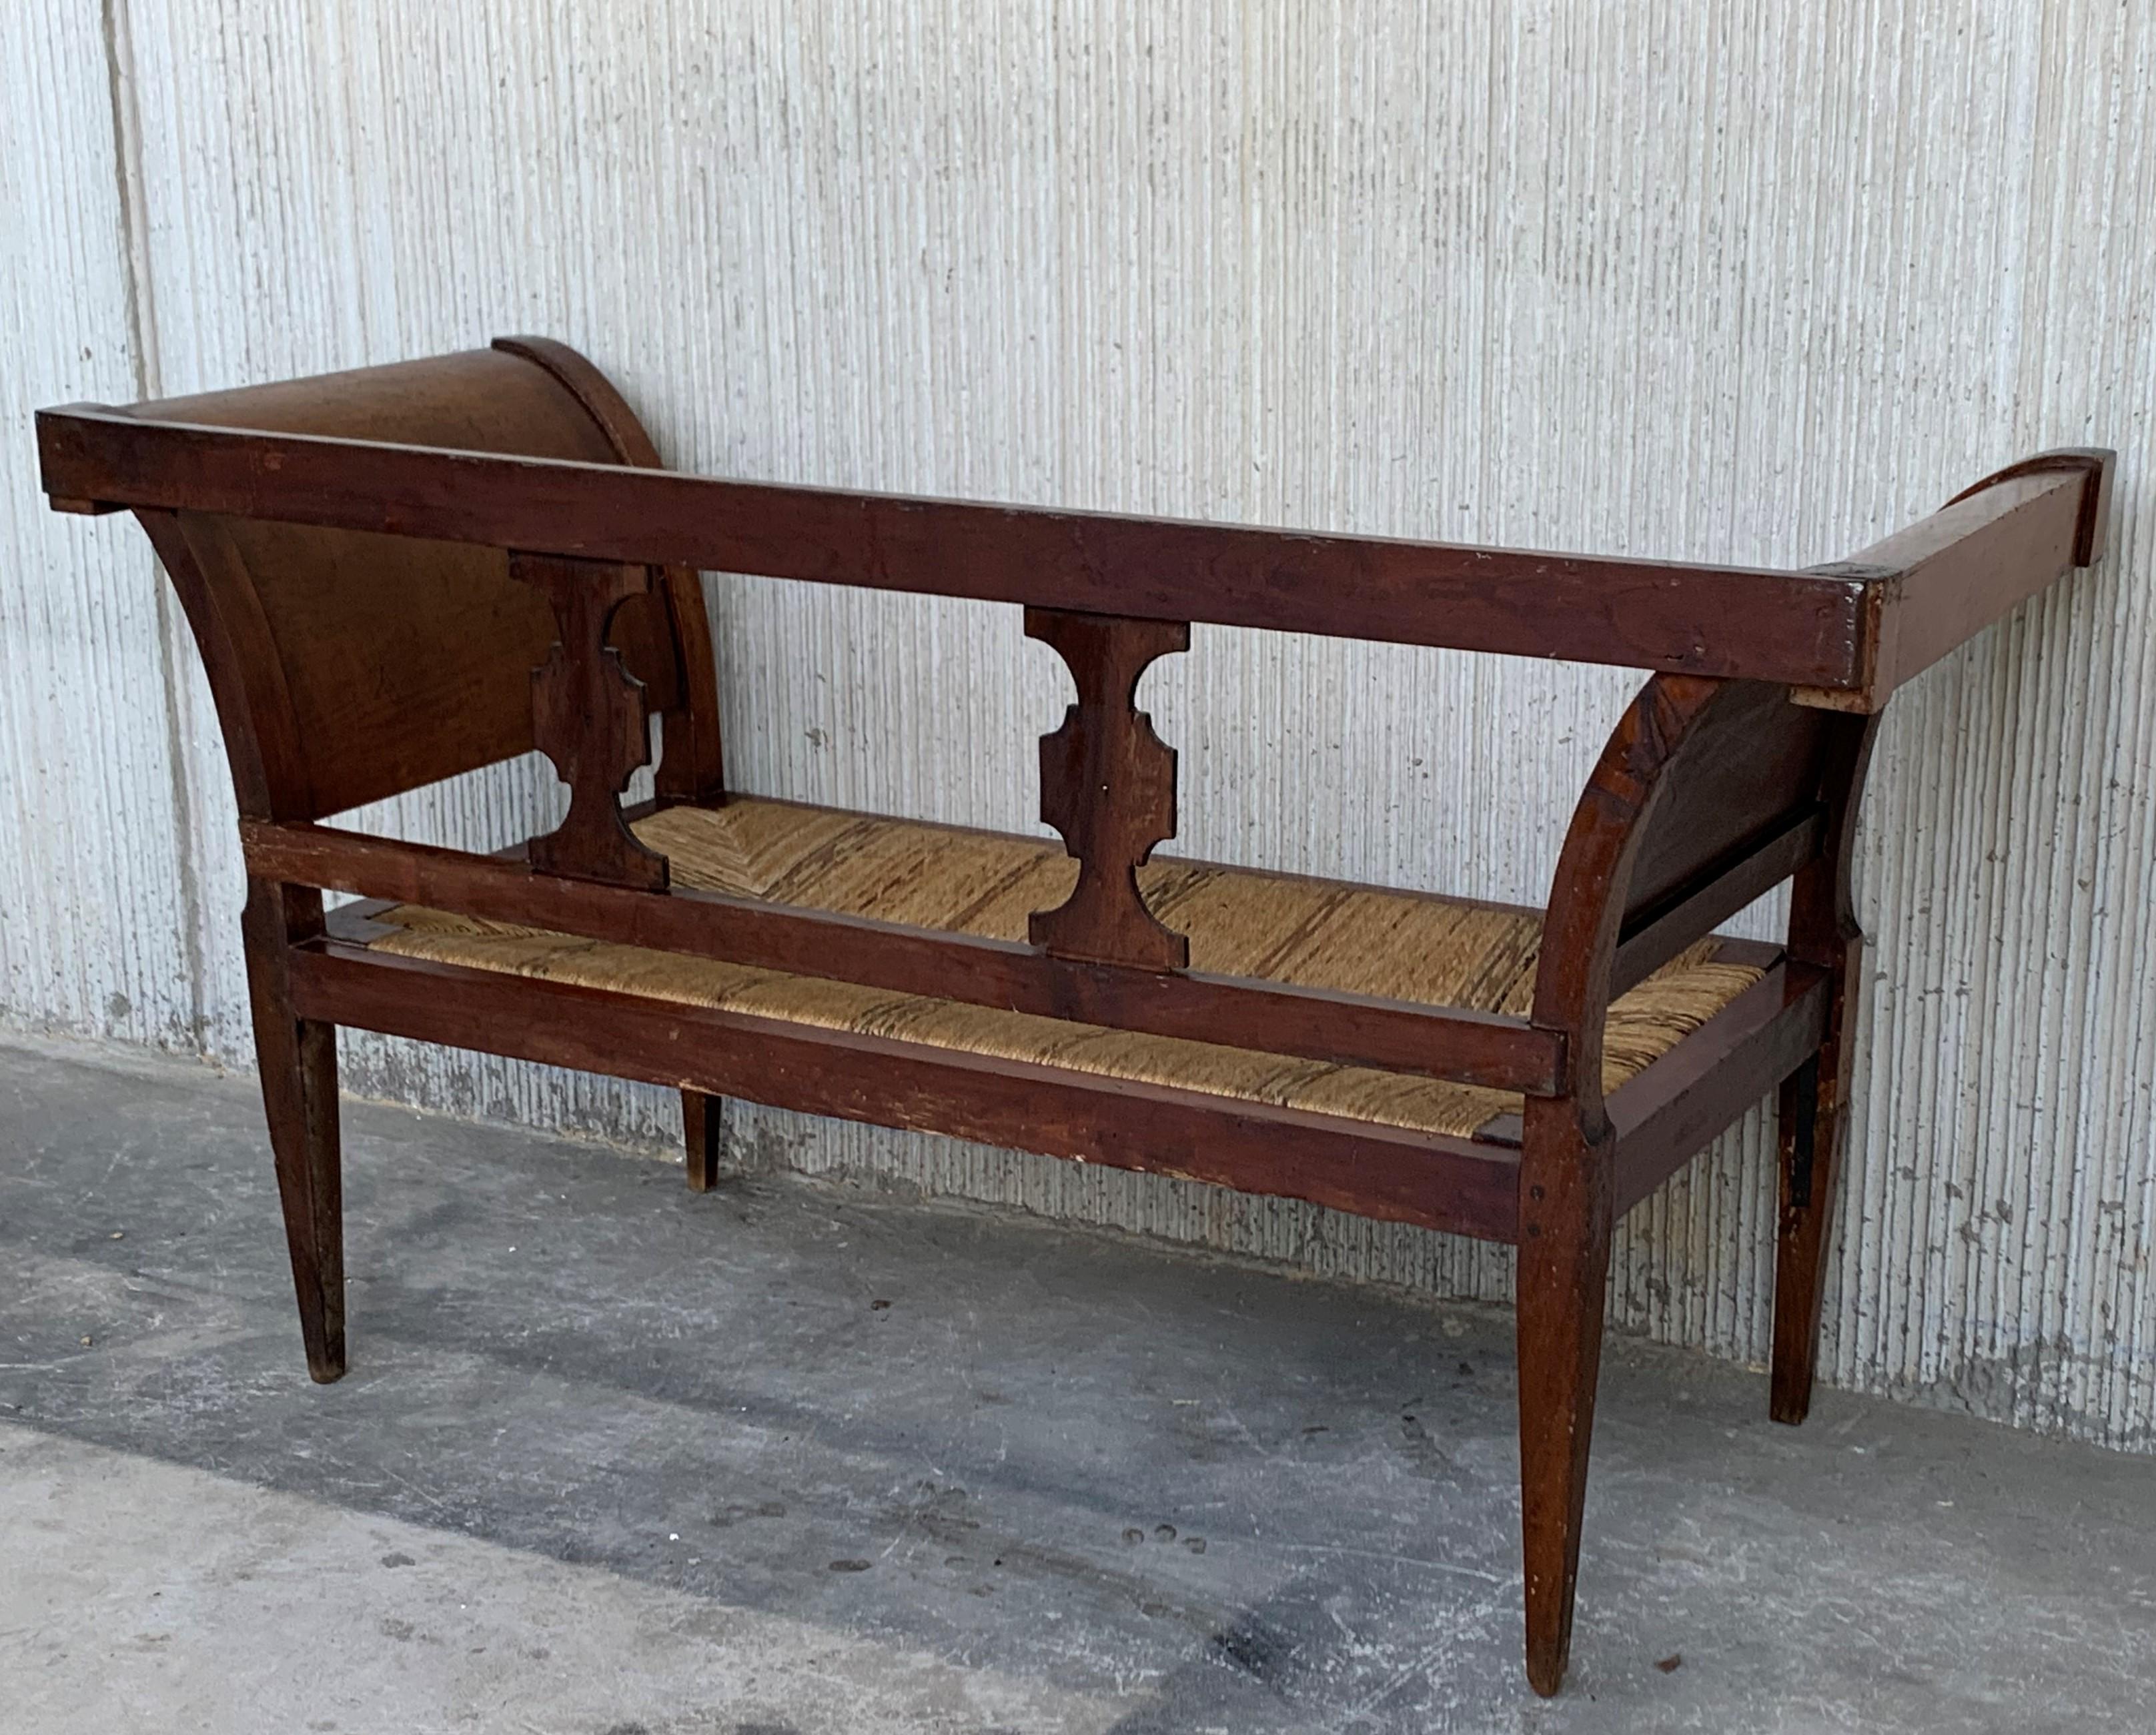 20th Century Empire Bench in Walnut with Ebonized Details and Caned Seat 2